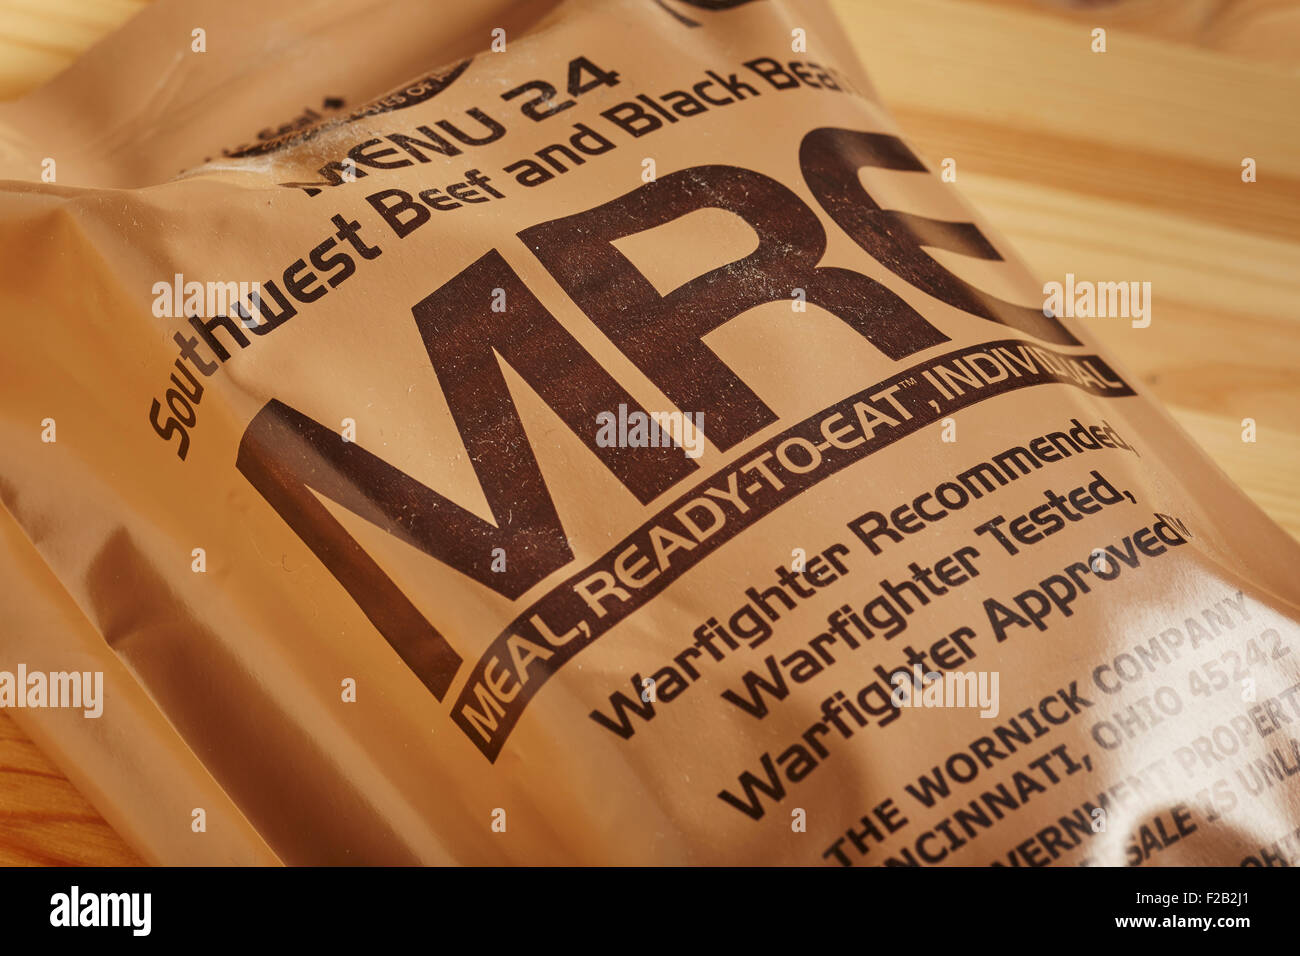 A United States Govenment issued complete meal called an 'MRE.' They are used both by the military and emergency services. Stock Photo